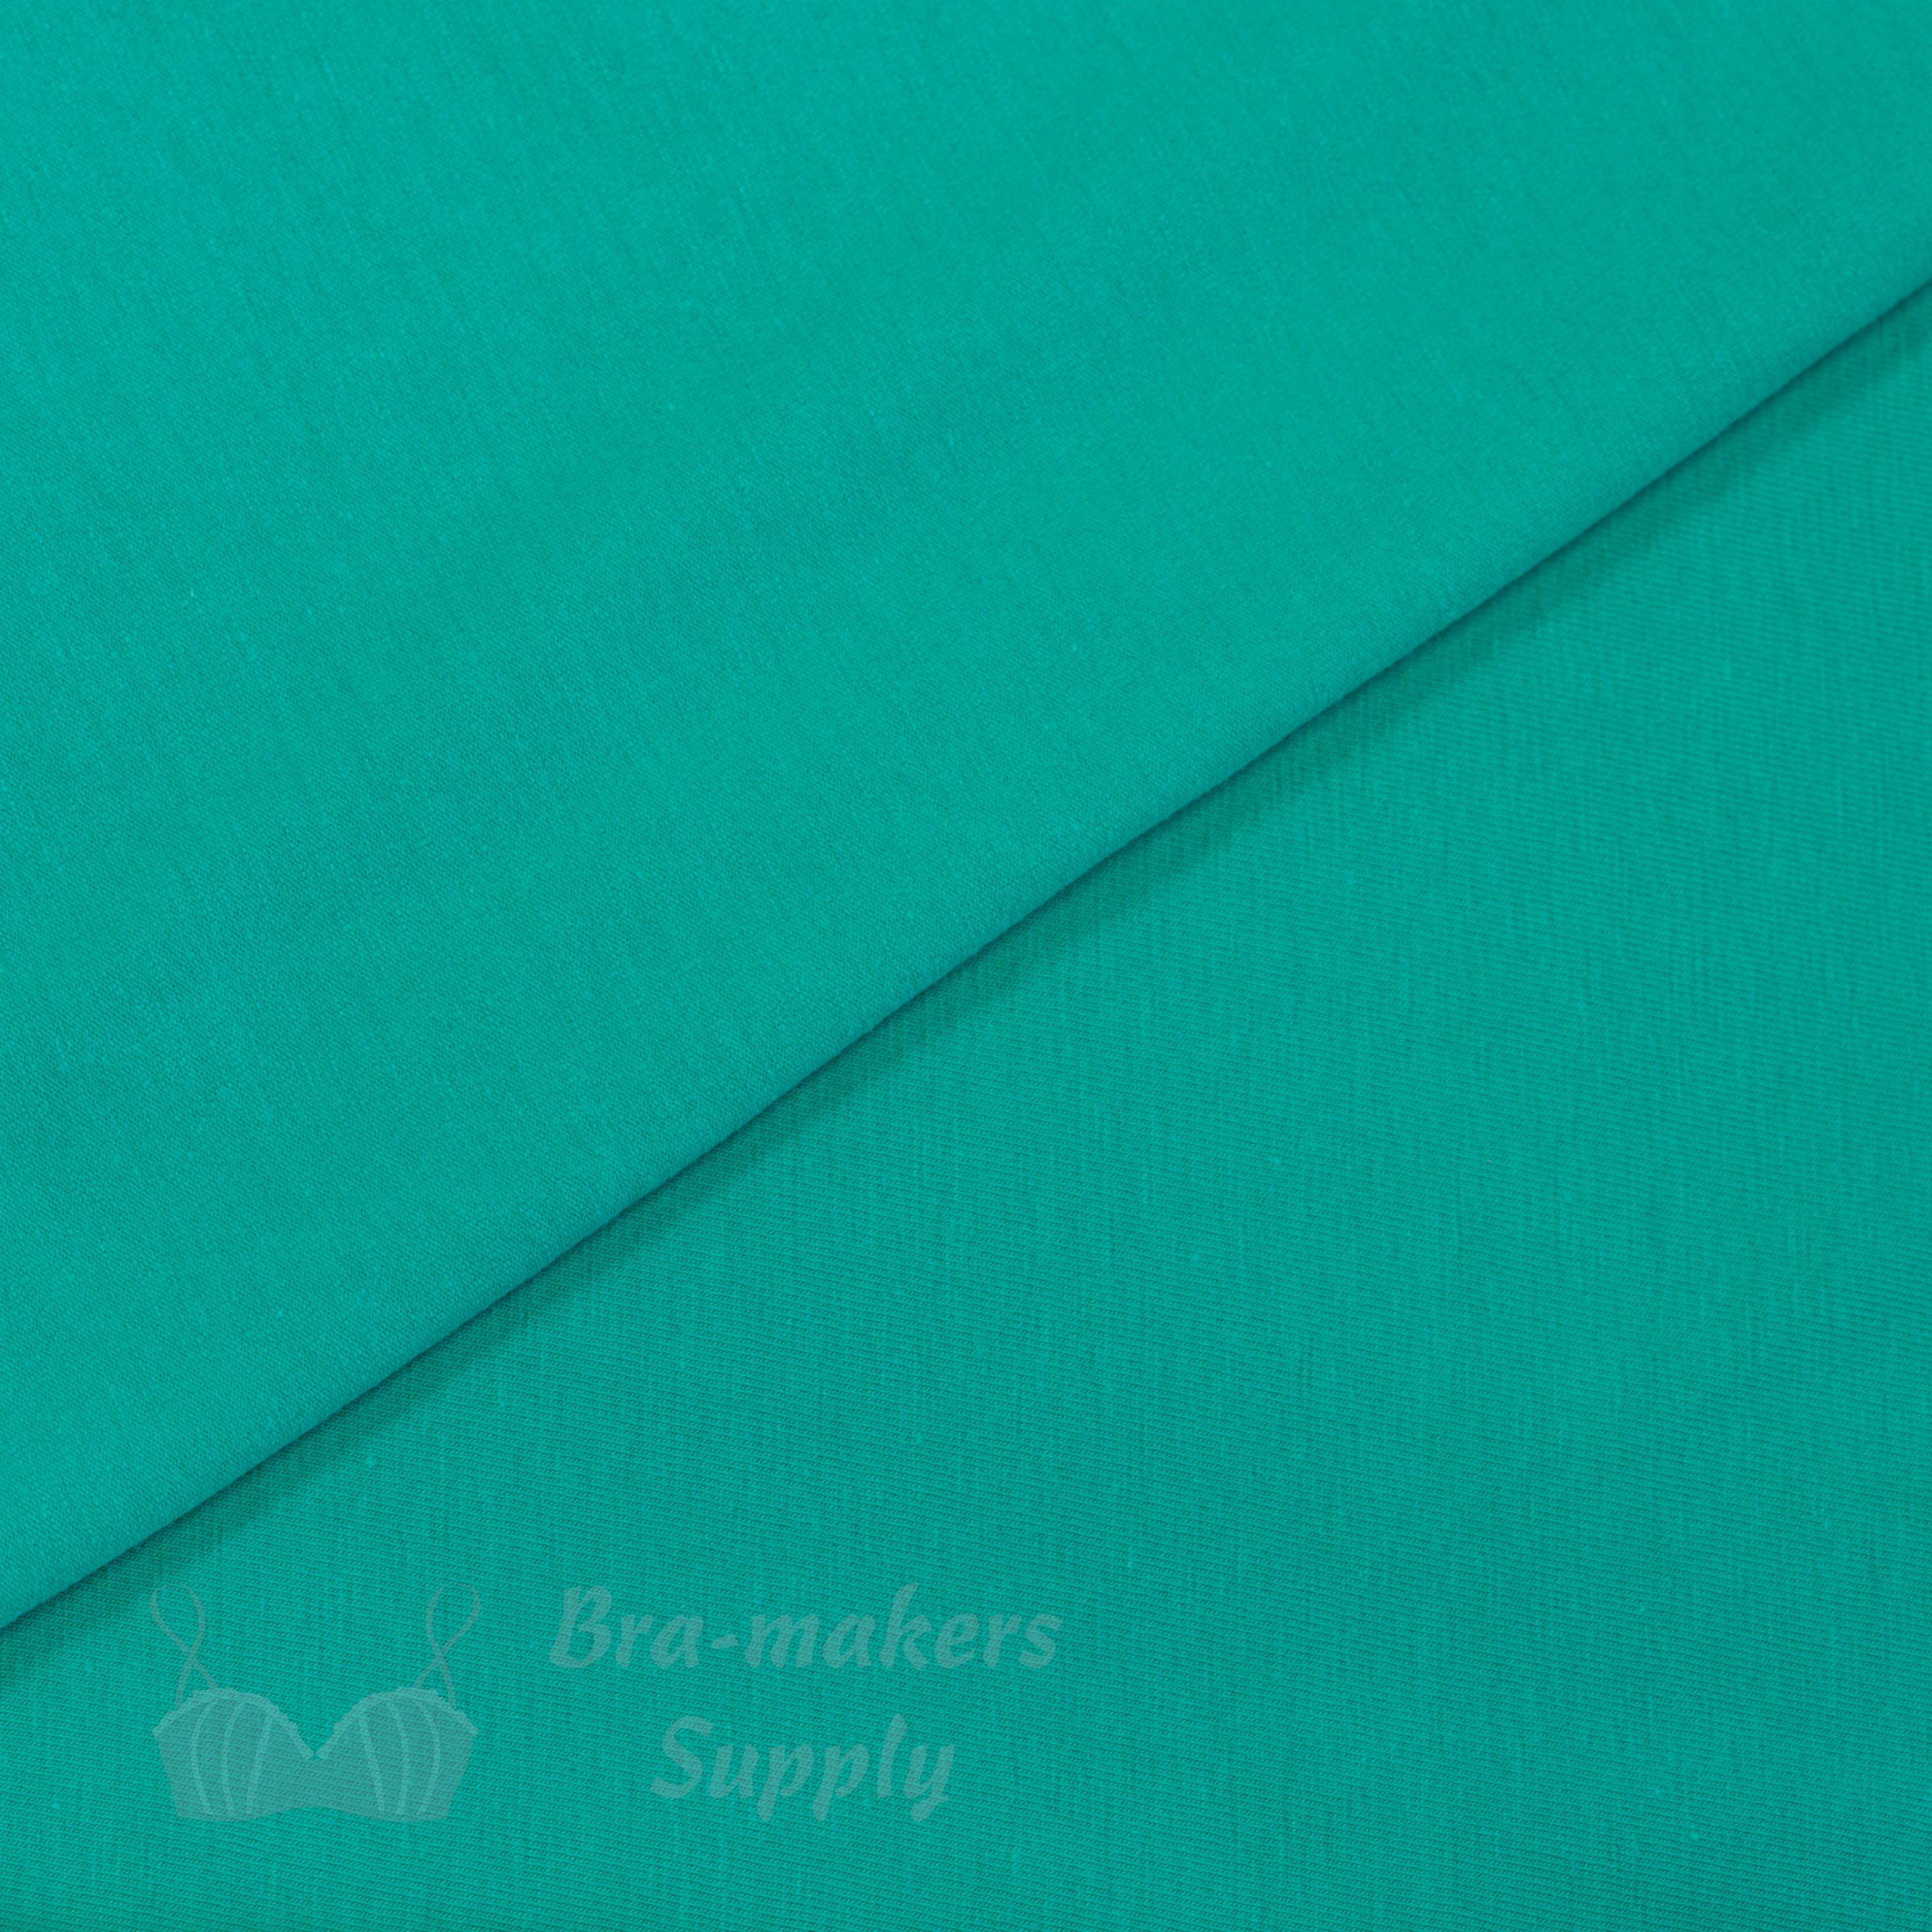 active cotton spandex fabric wickable fabric FC-75 spearmint from Bra-Makers Supply folded shown